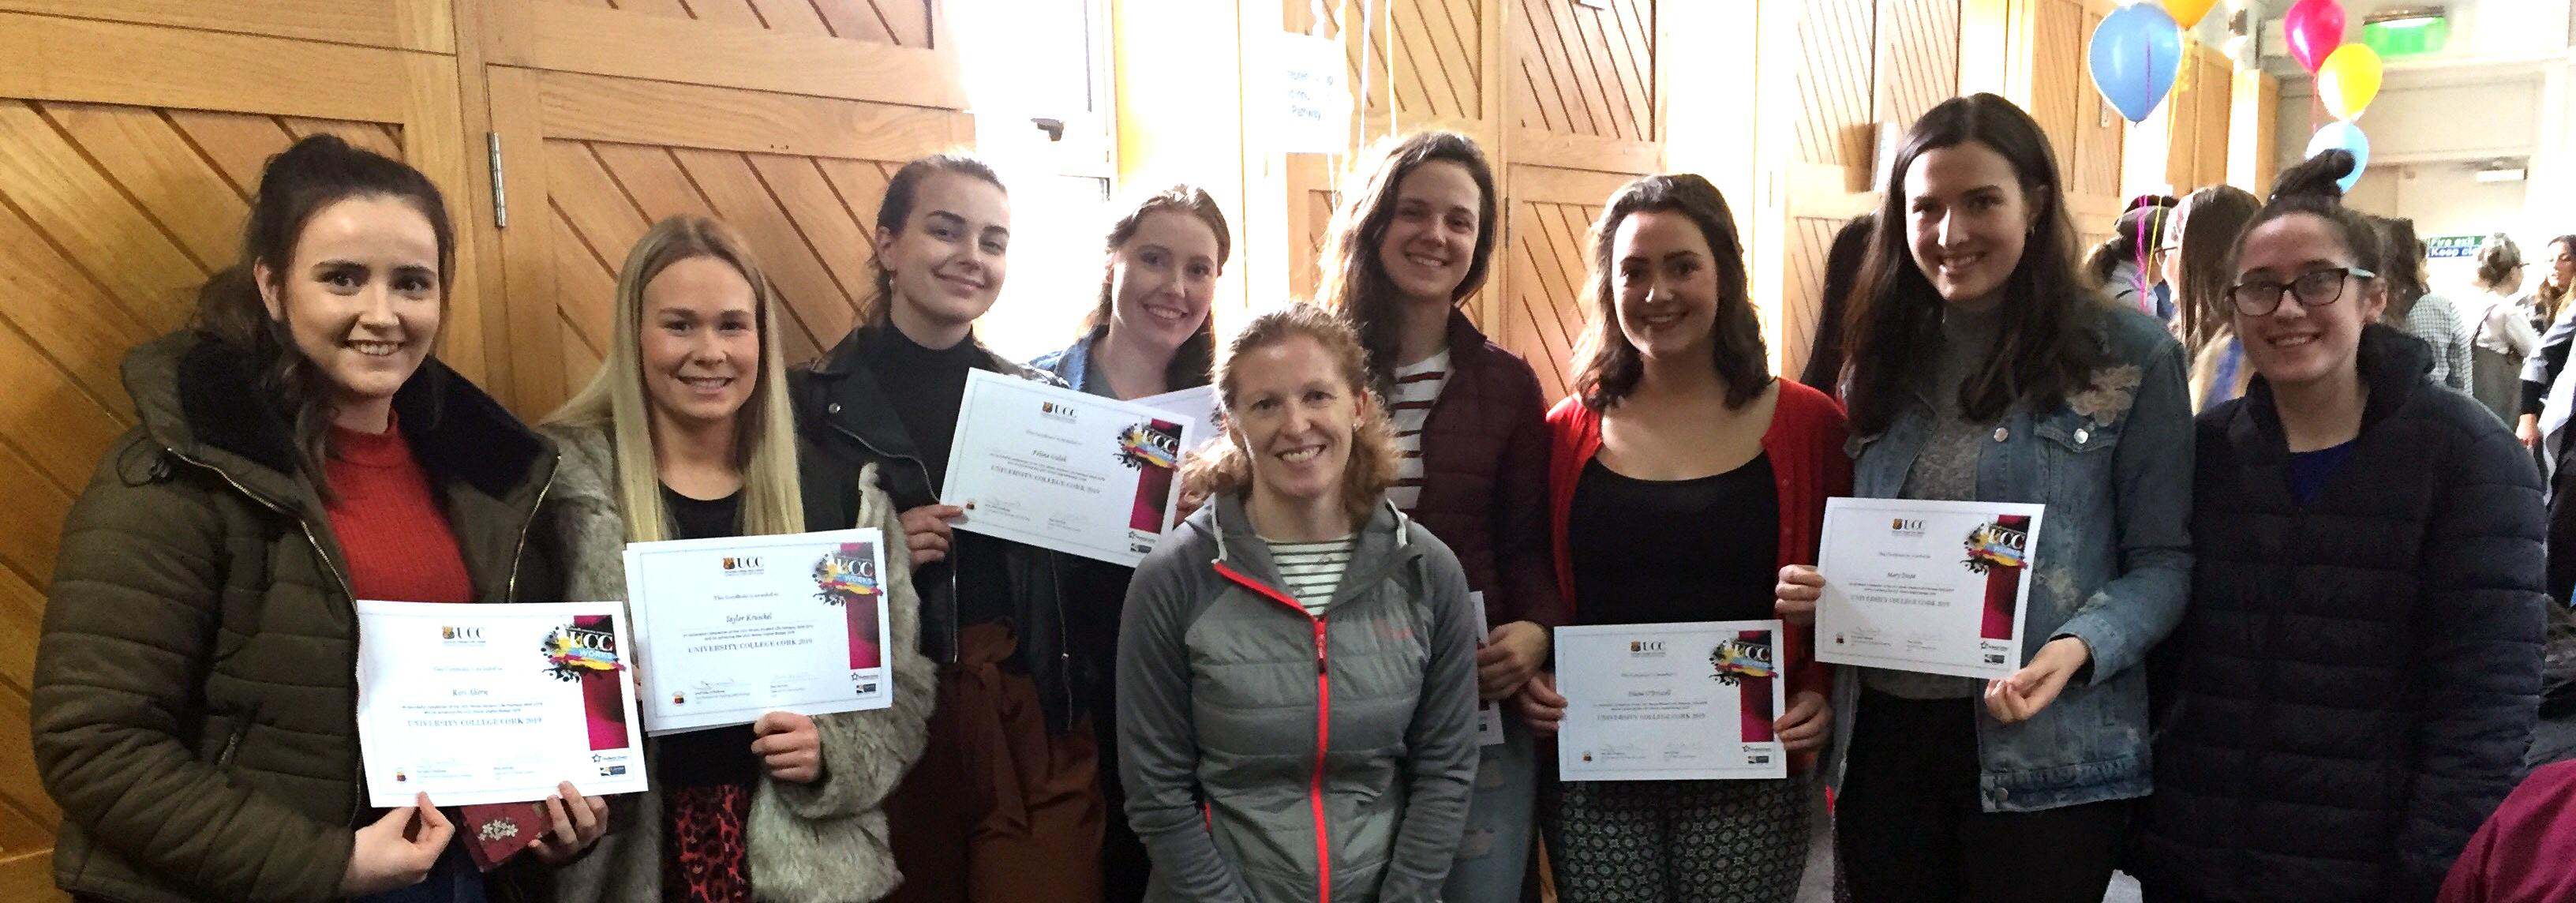 3rd Year students receive a UCC Works Award for volunteering and community engagement.	